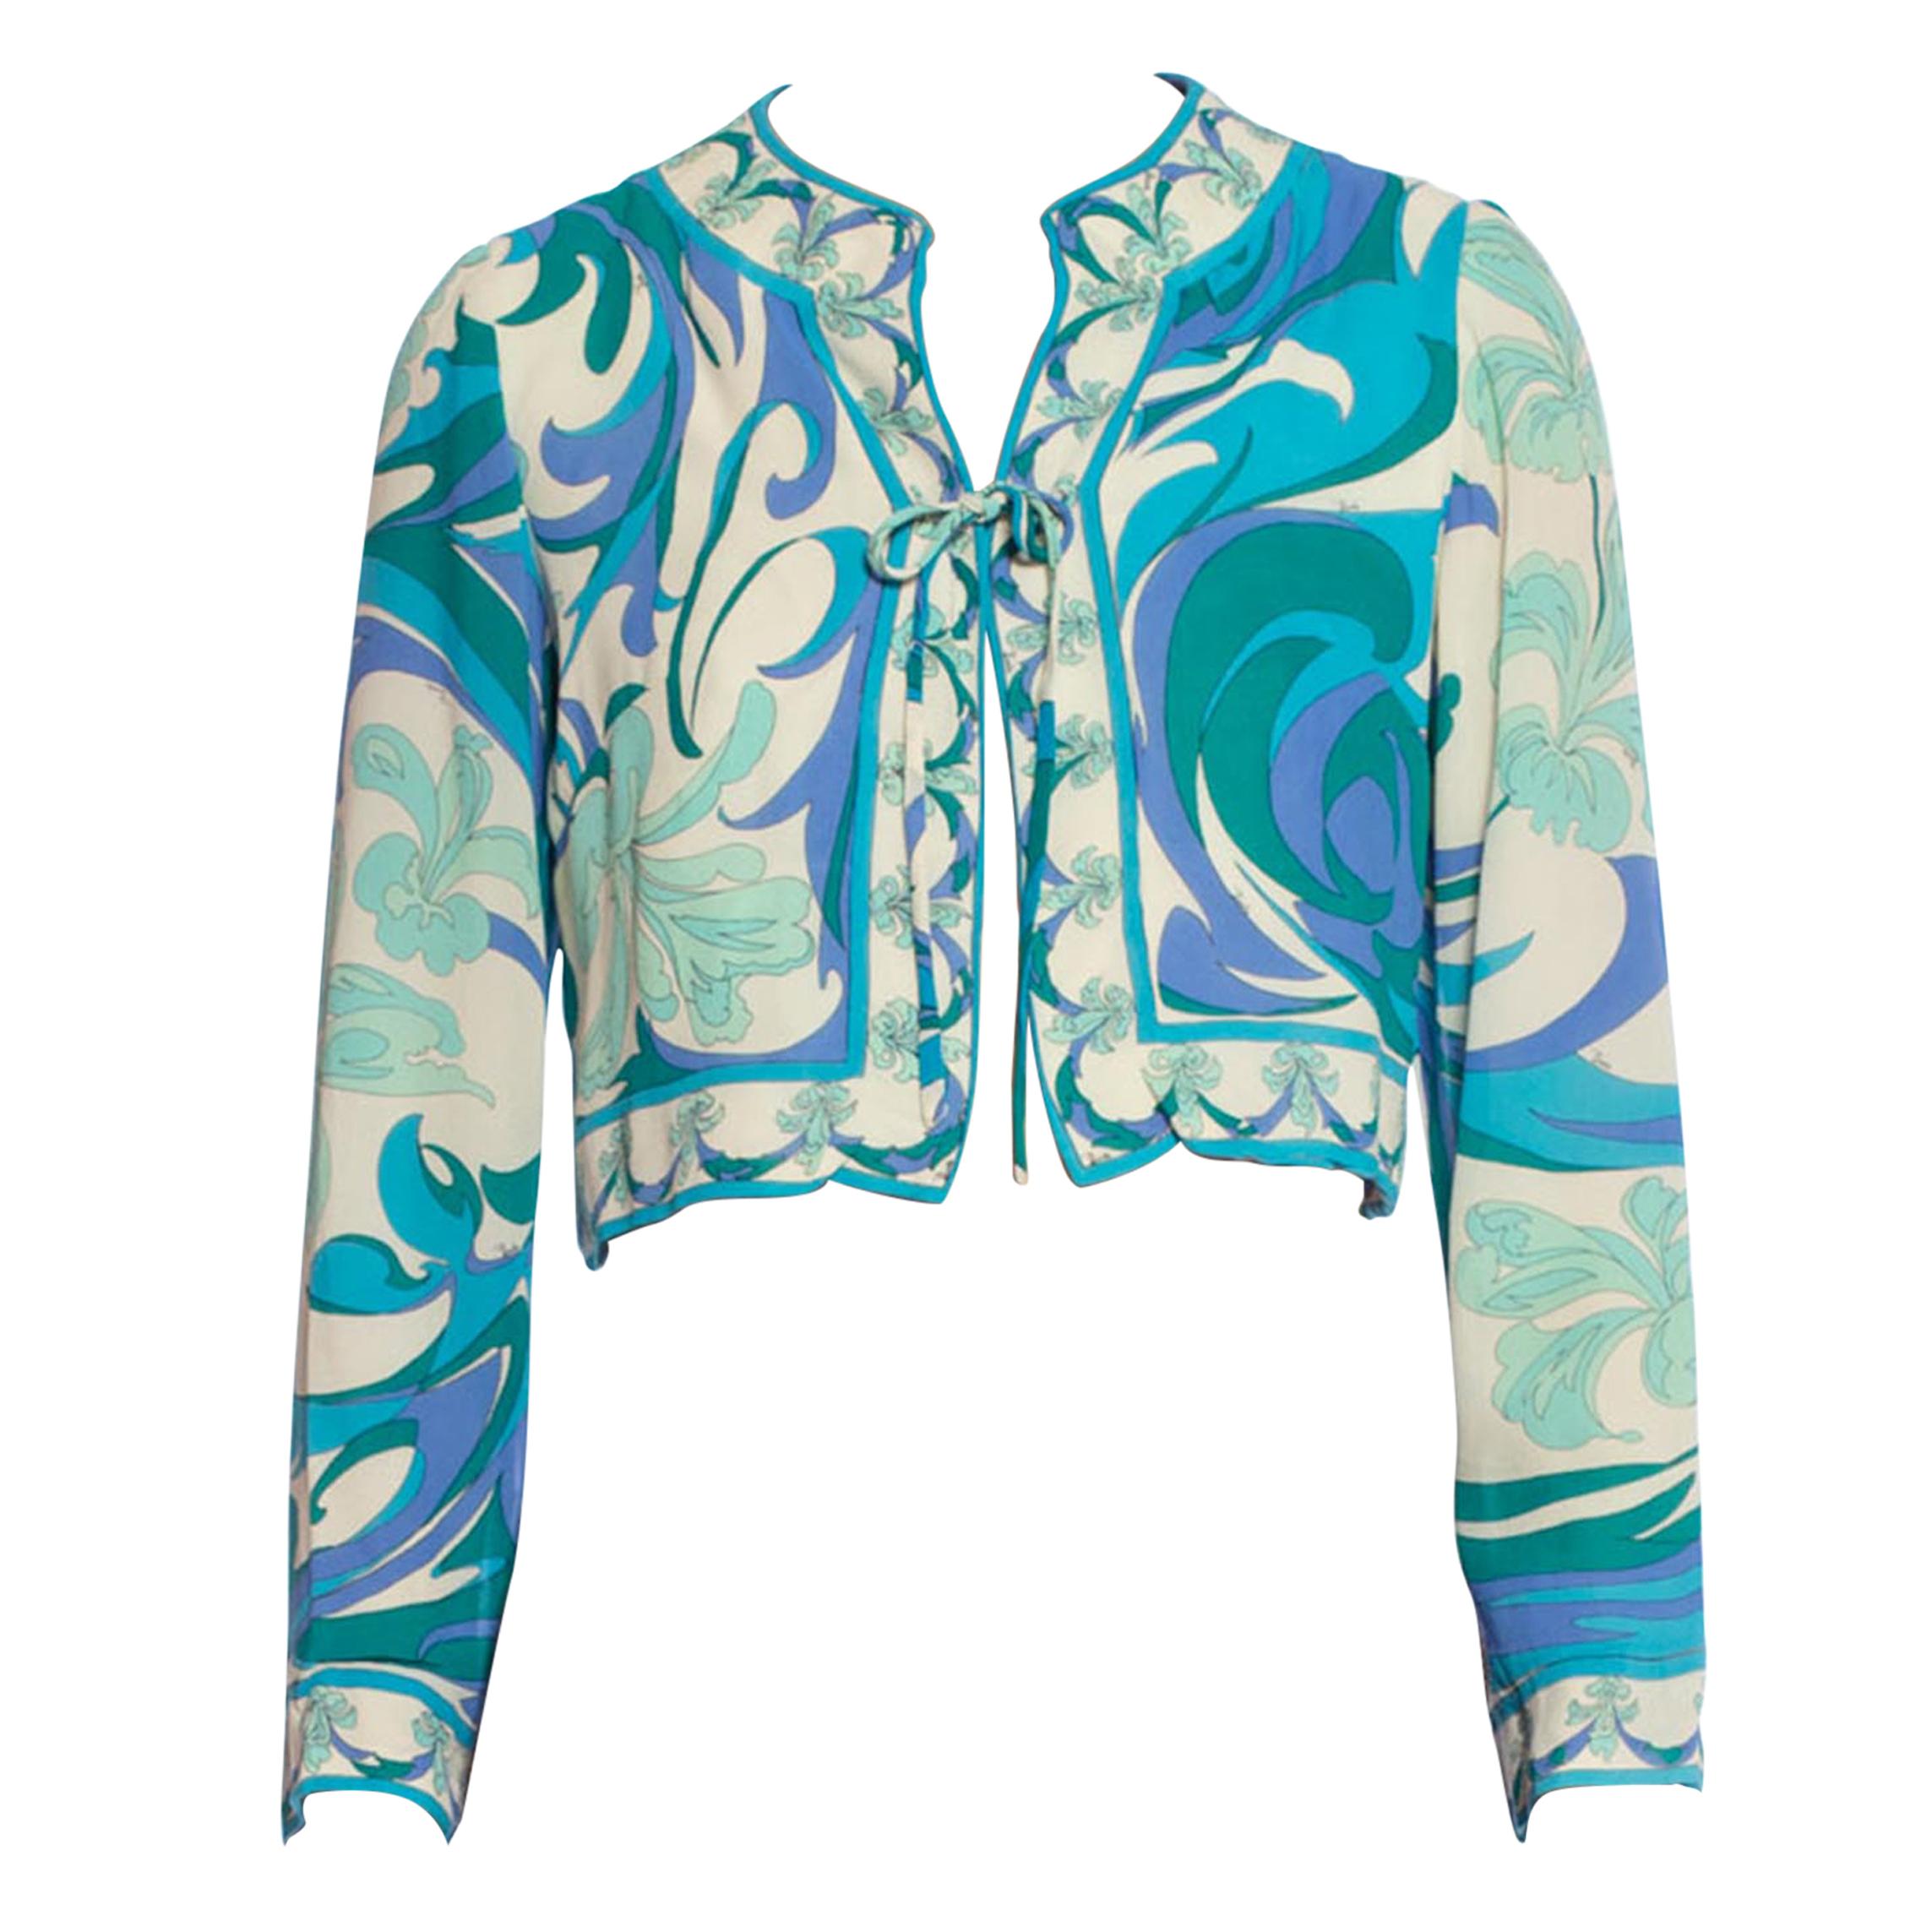 1960S EMILIO PUCCI Turquoise & White Silk Floral Psychedelic Cropped Jacket Top